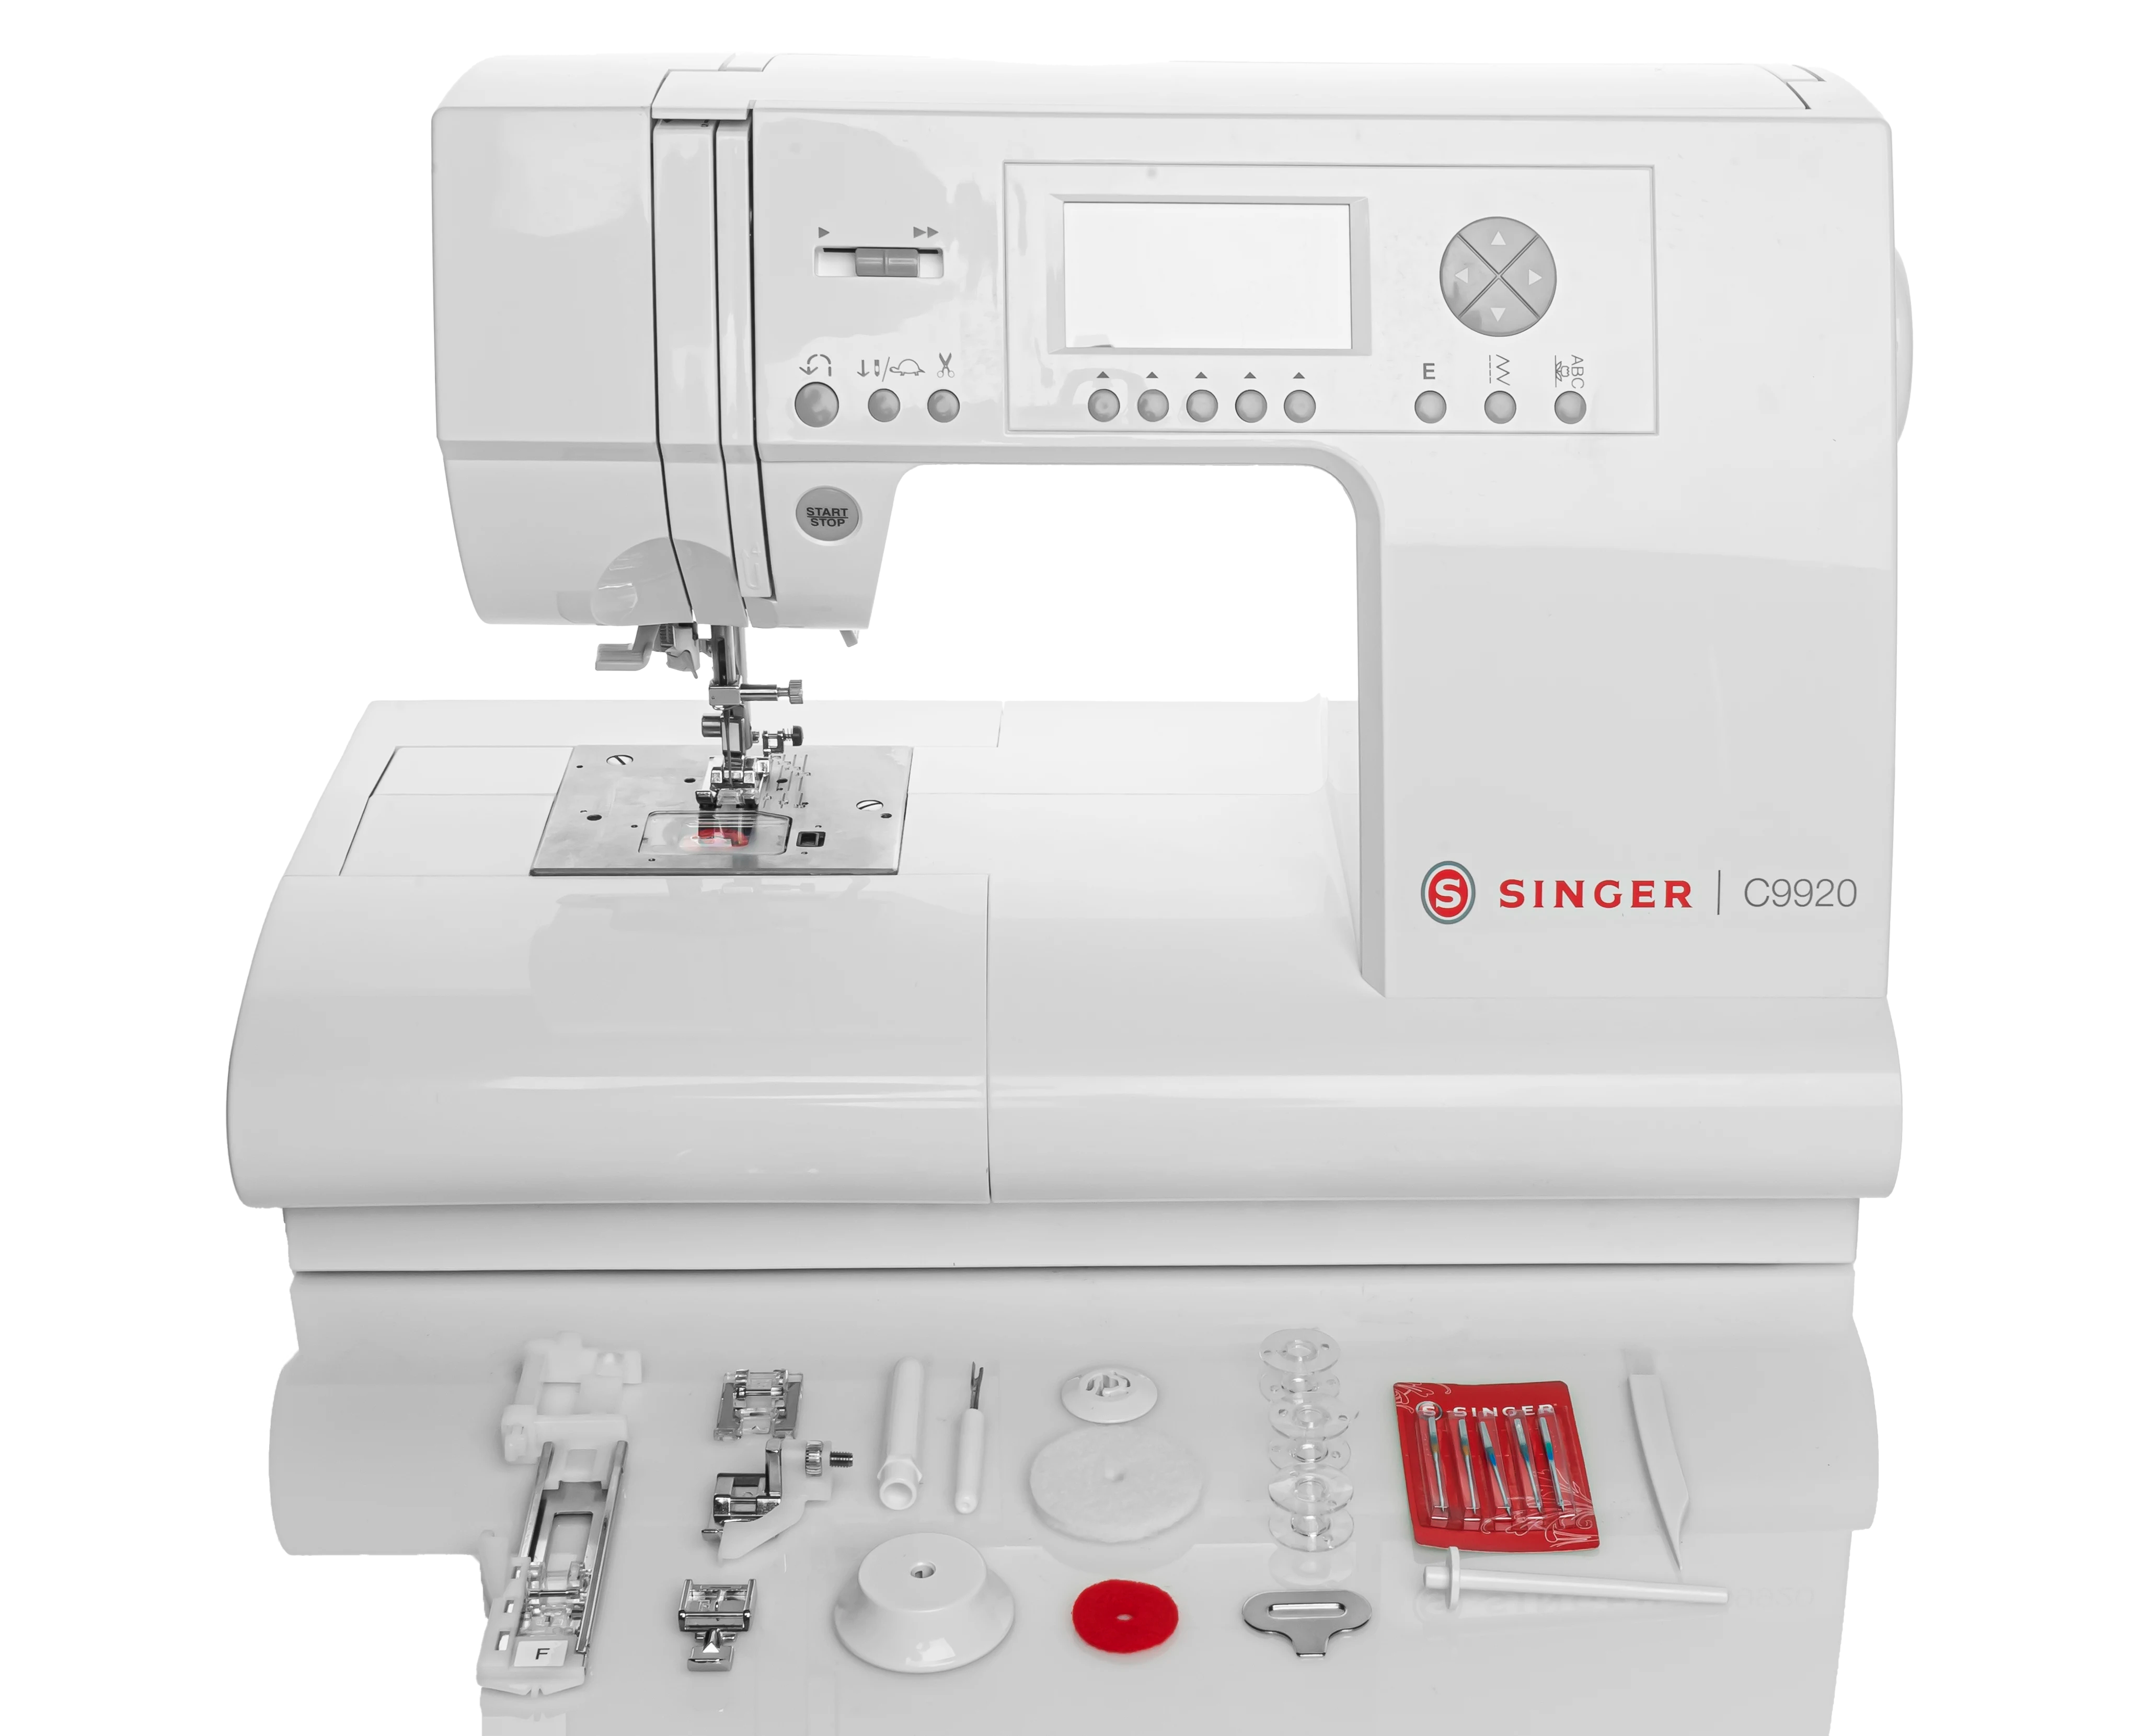 Singer C9920 Sewing Machine with accessories